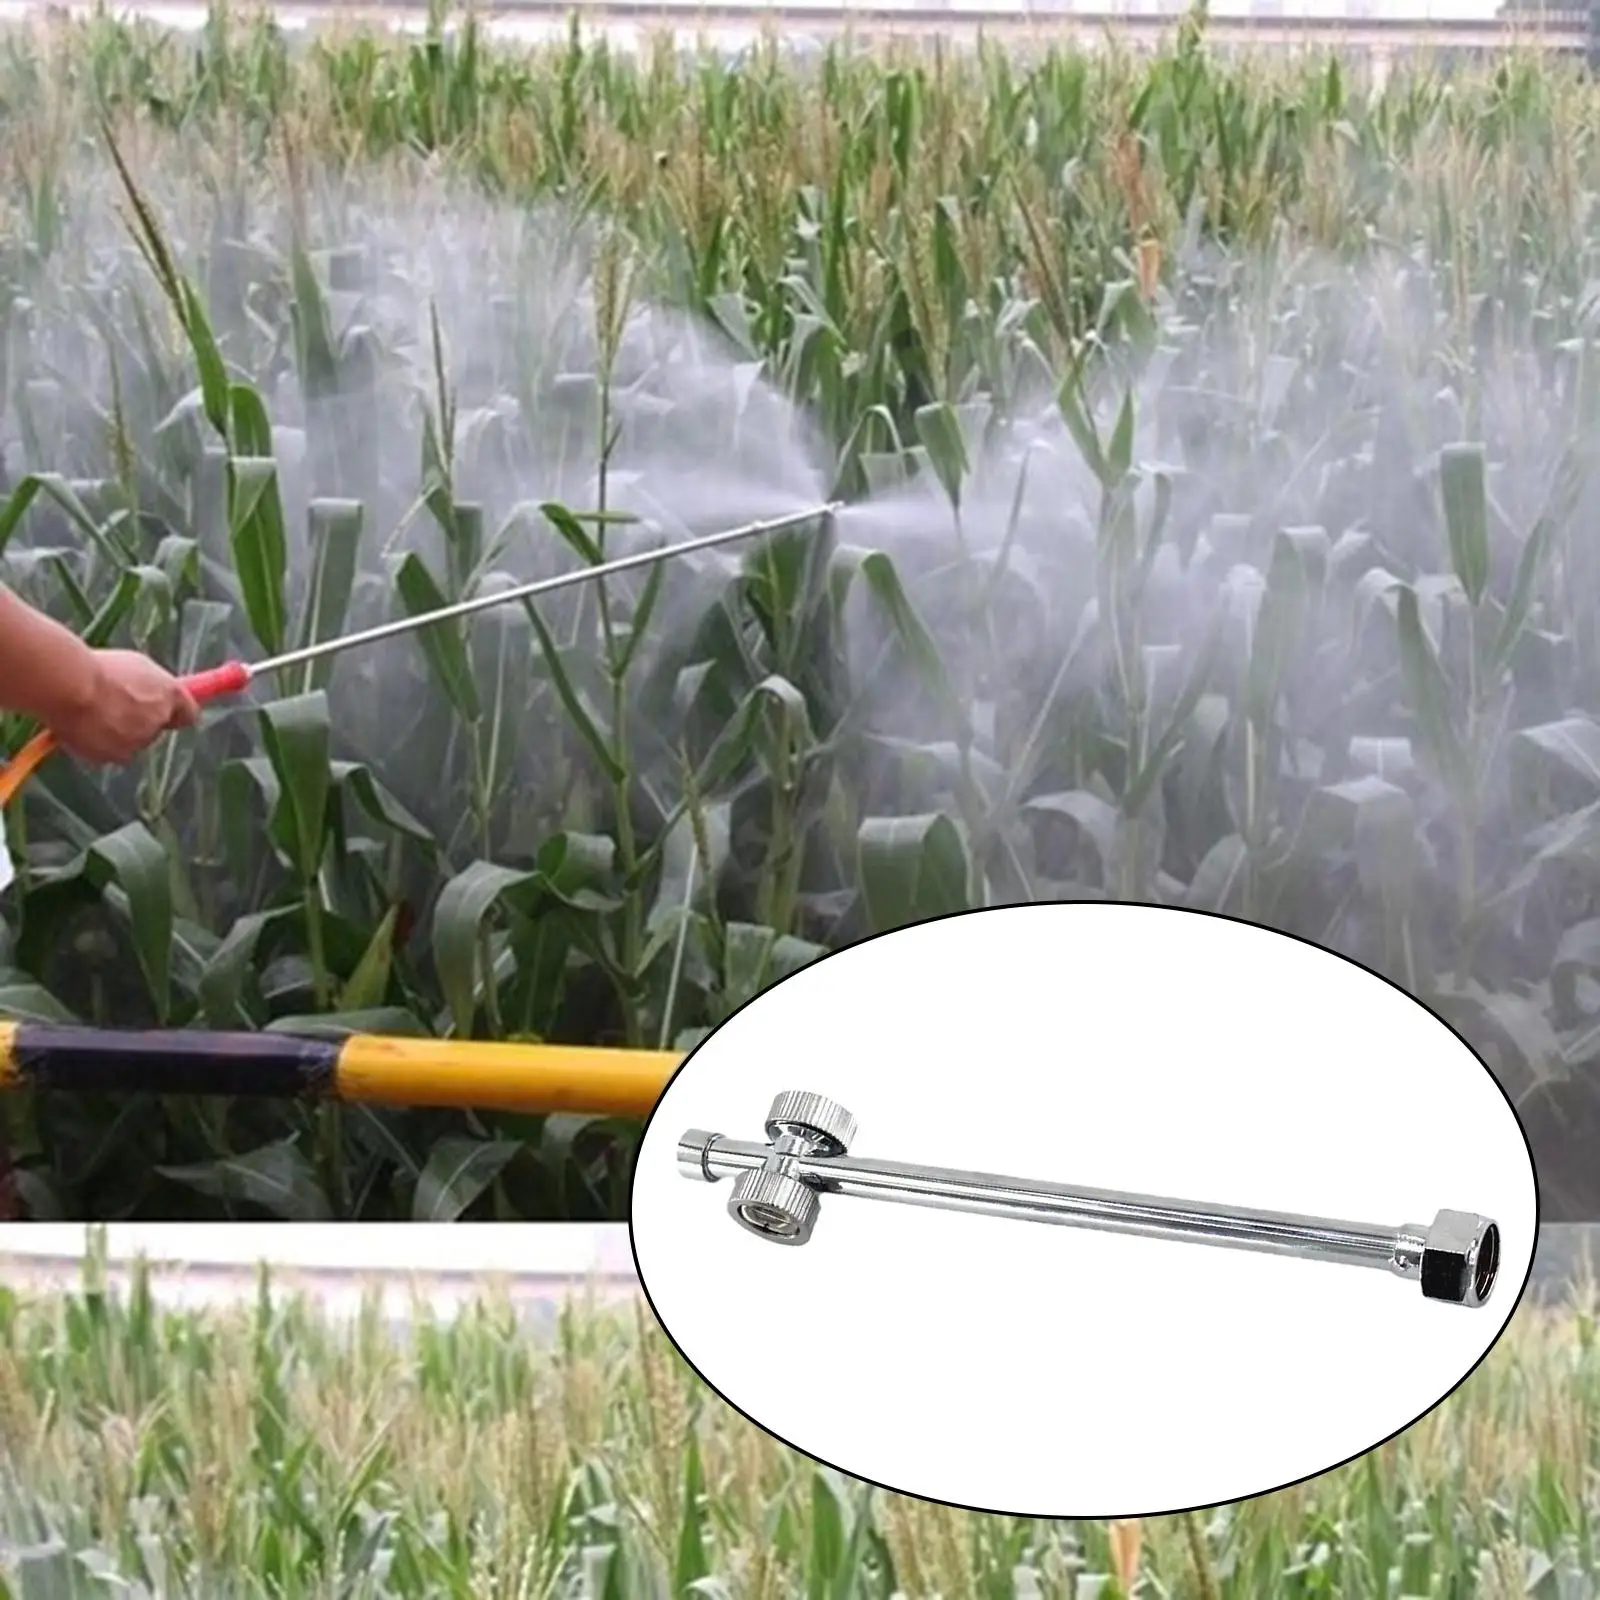 7.5 Inch Straight Sprayer Fan-shaped Double-sided Nozzle for Garden